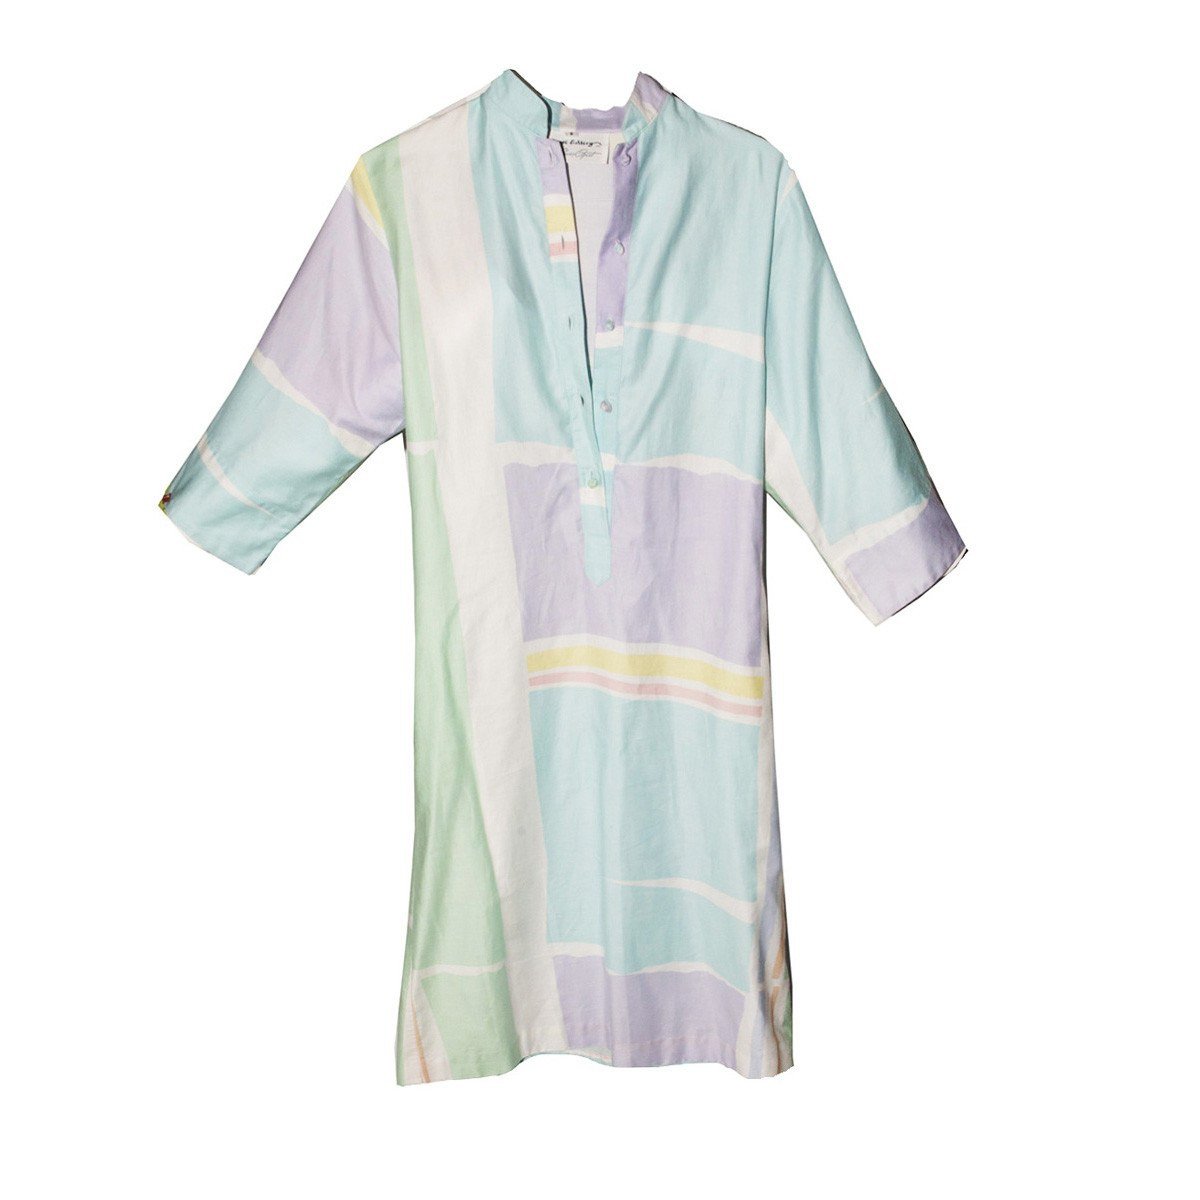 Catherine Ogust Pastel Abstract Print Dress, Vintage 1980s